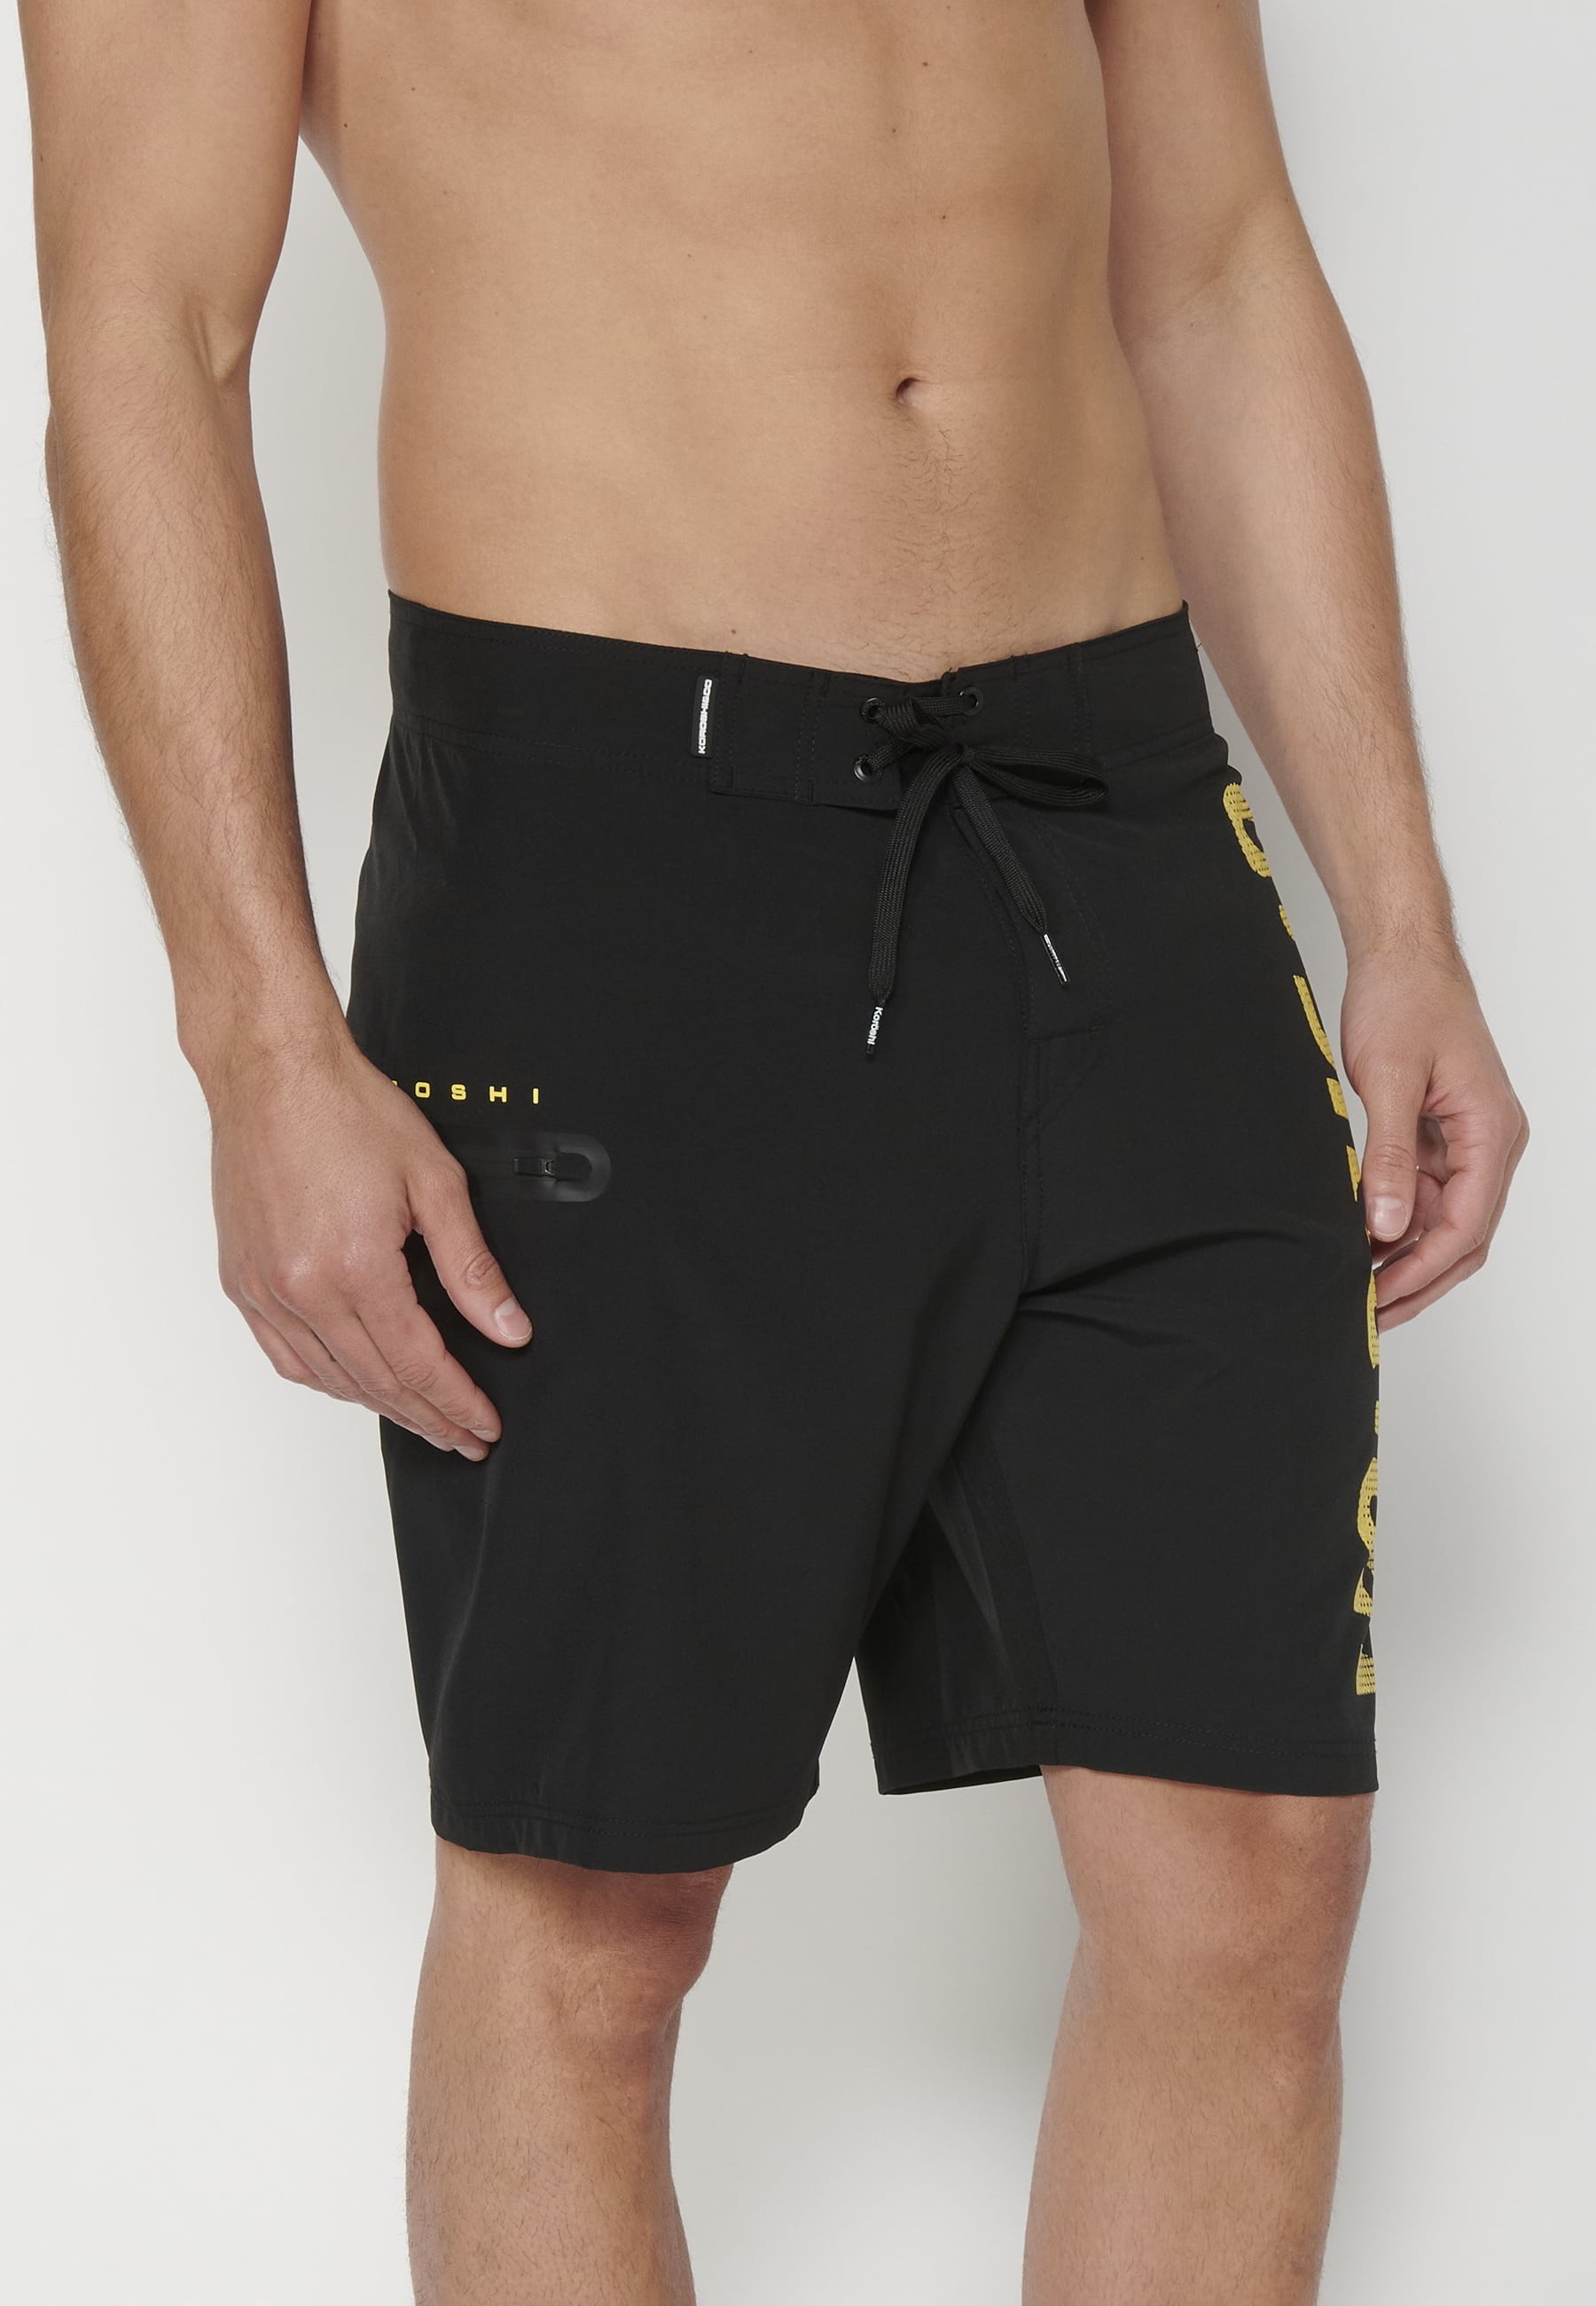 Short Surfer-style swimsuit with three Pockets in Black color for Men